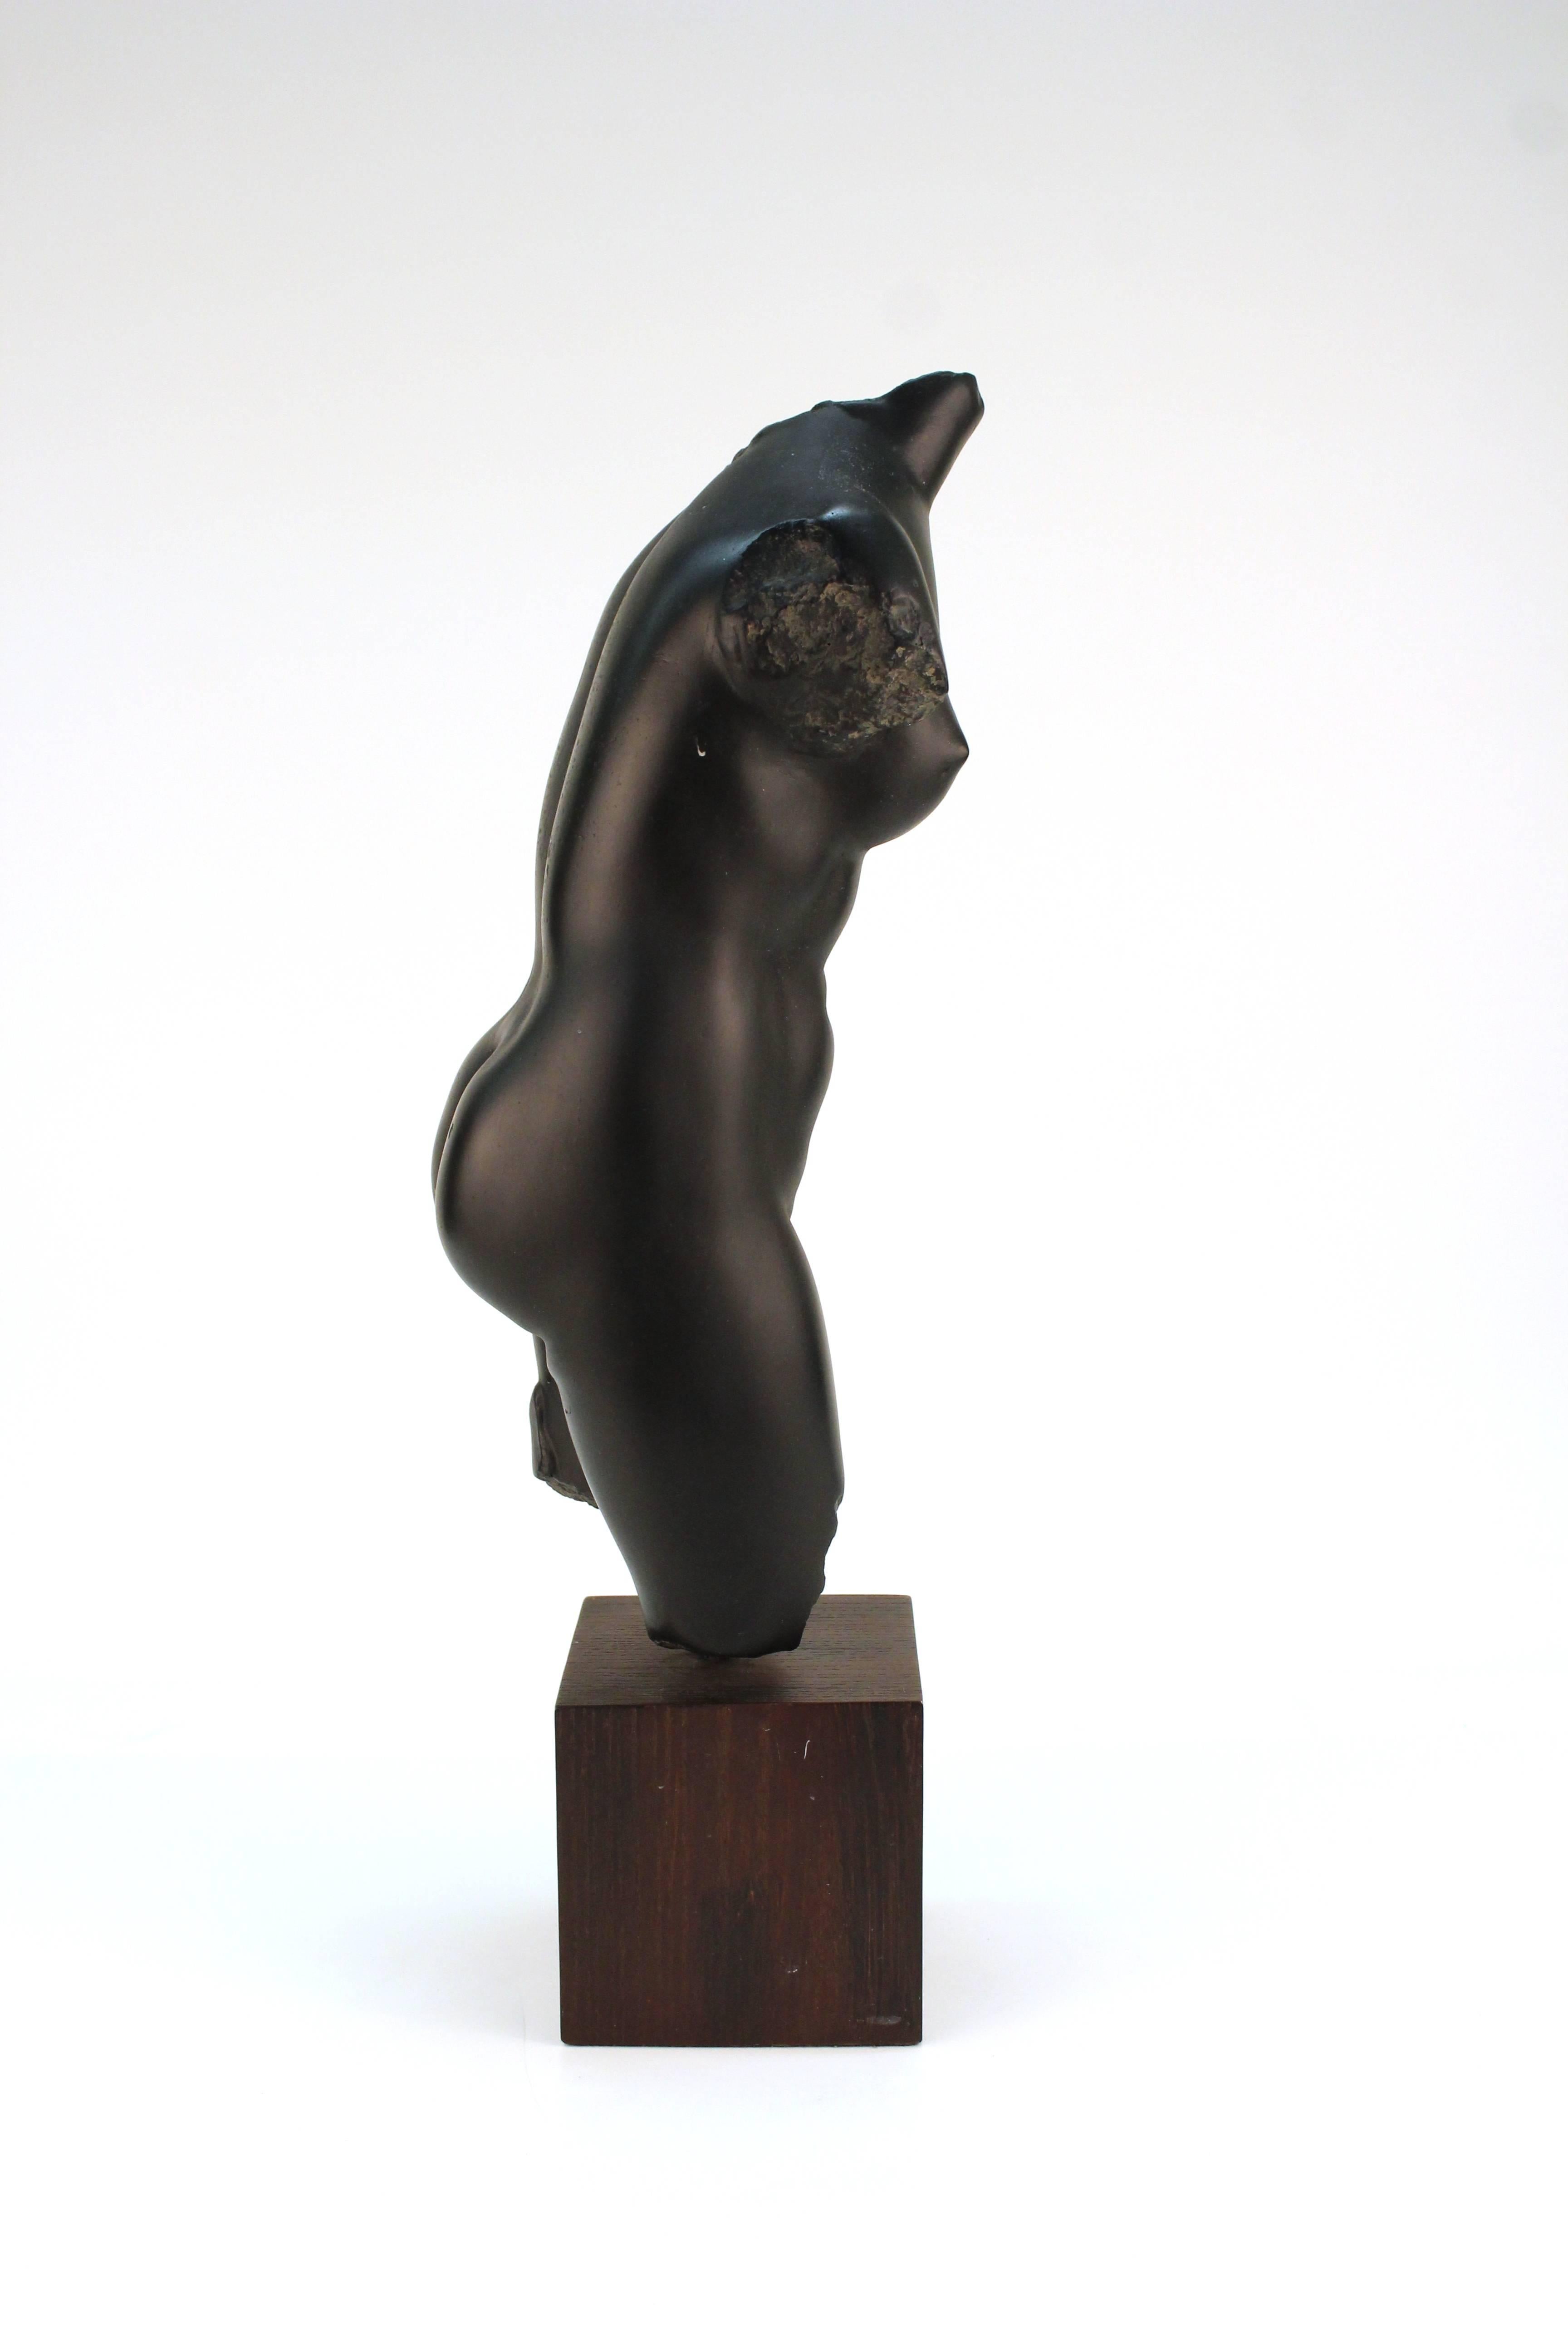 Black resin sculpture of a classical female torso mounted on a wooden base. Includes hallmark for the Metropolitan Museum of Art in New York City. Despite some wear to the base the sculpture remains in good condition.